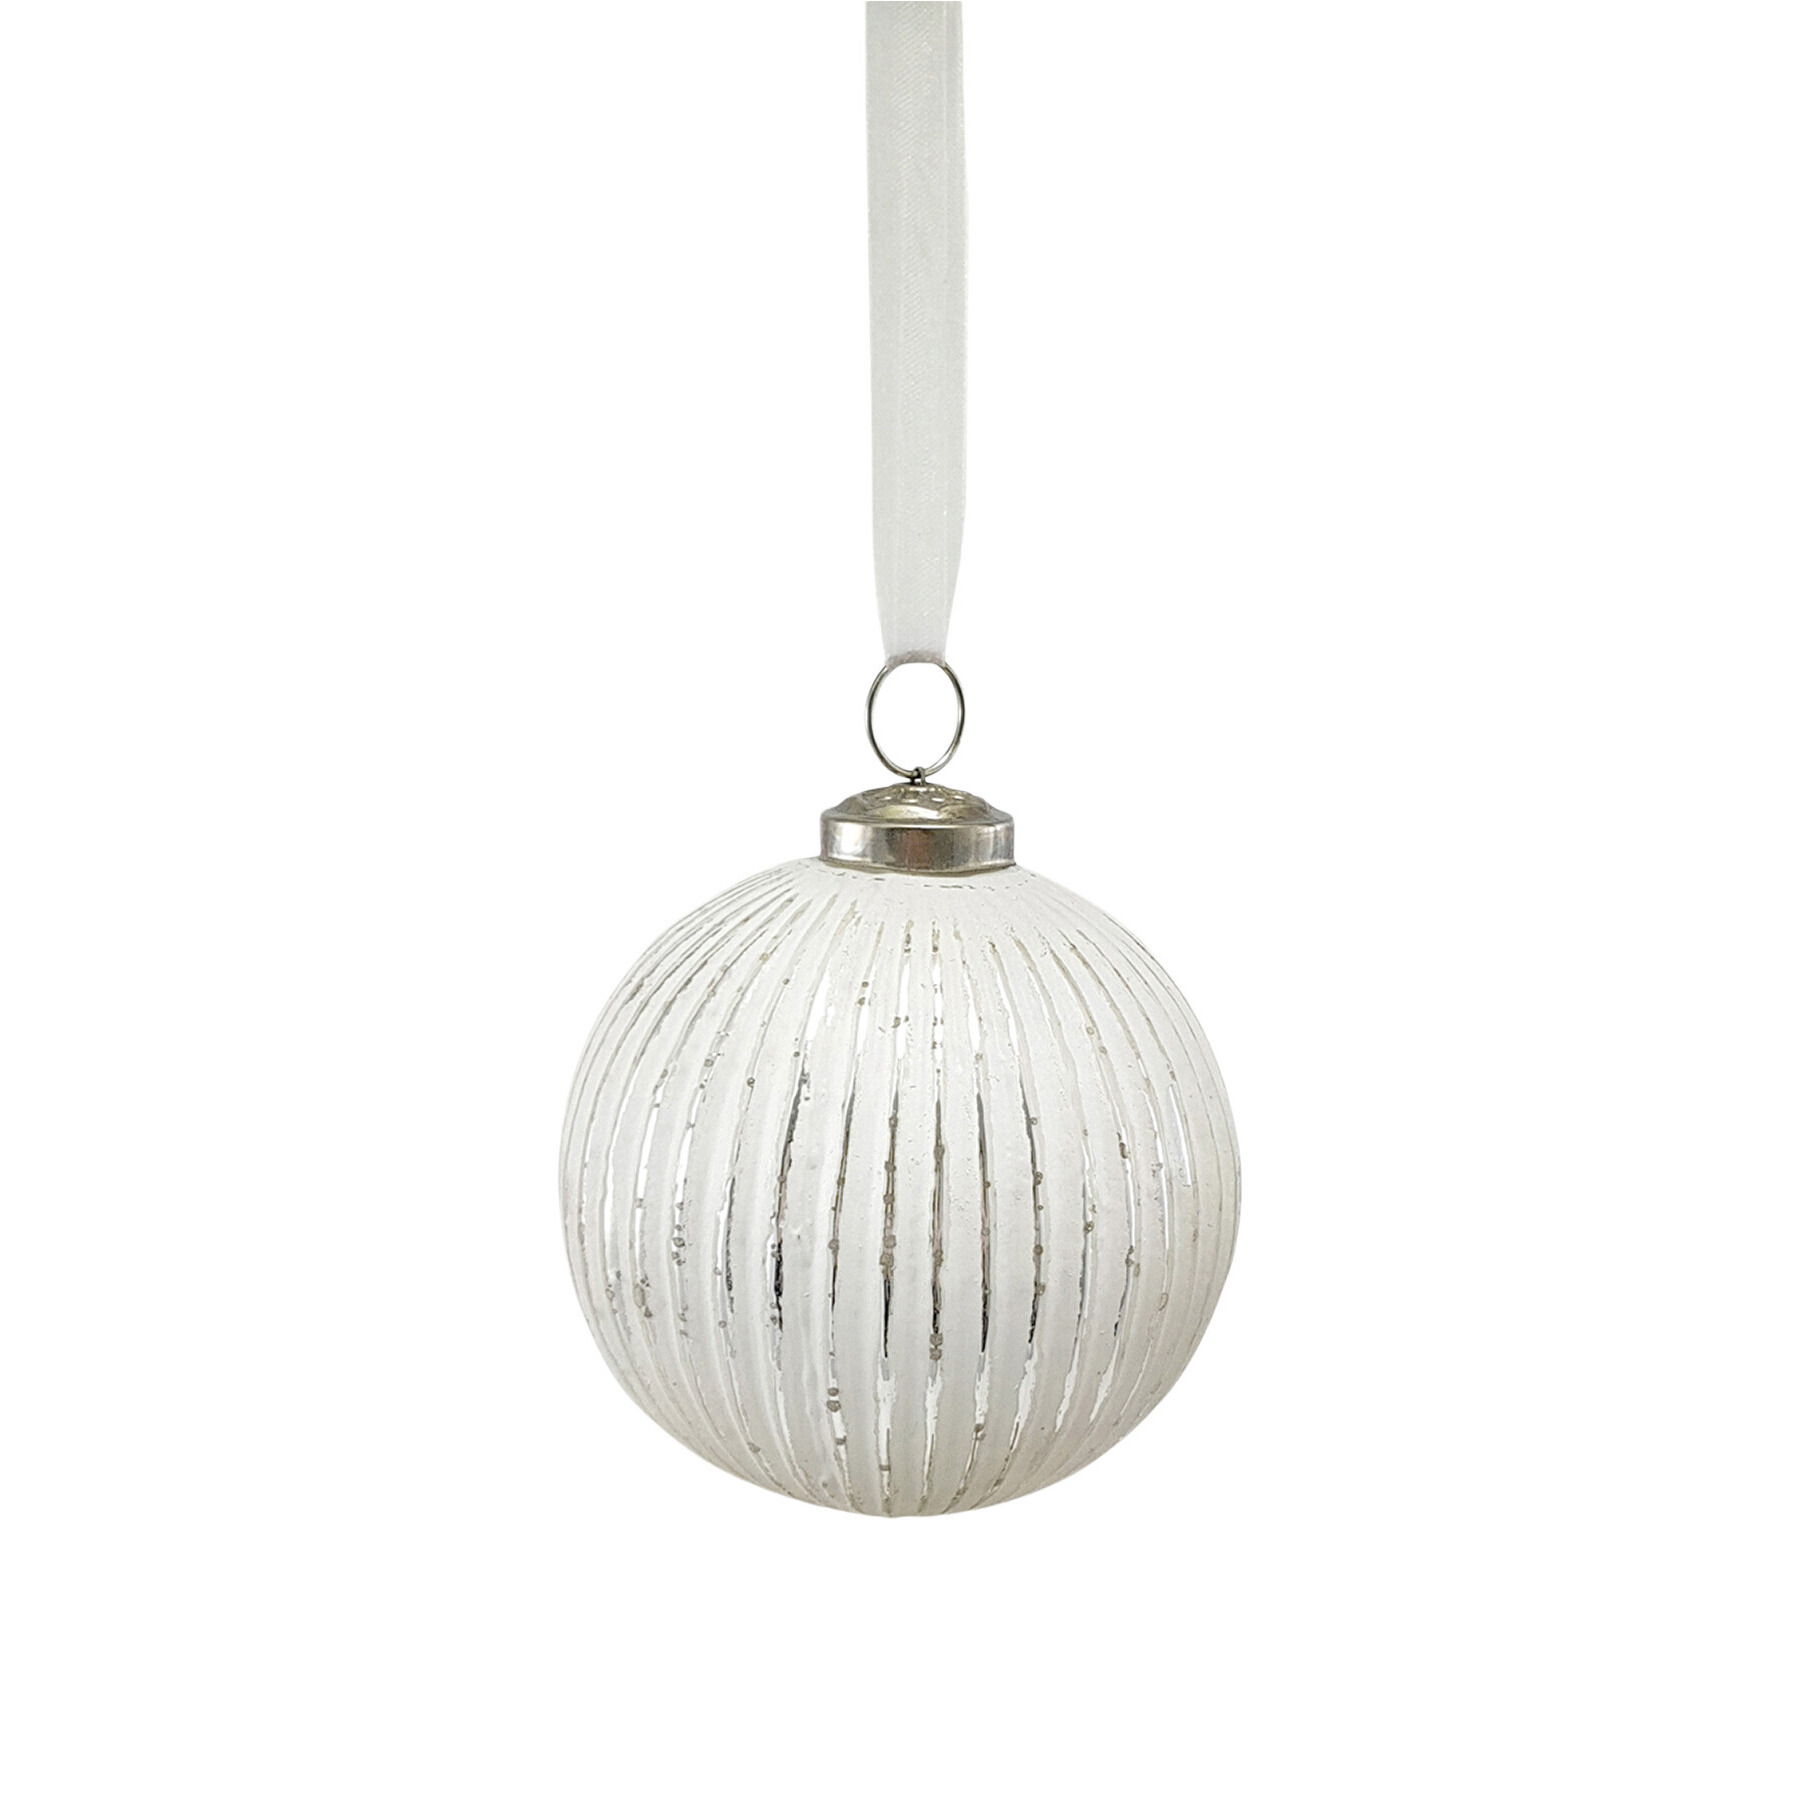 Culinary Concepts Classic Striped & Cross Hatch Baubles - Set of 6 - image 1